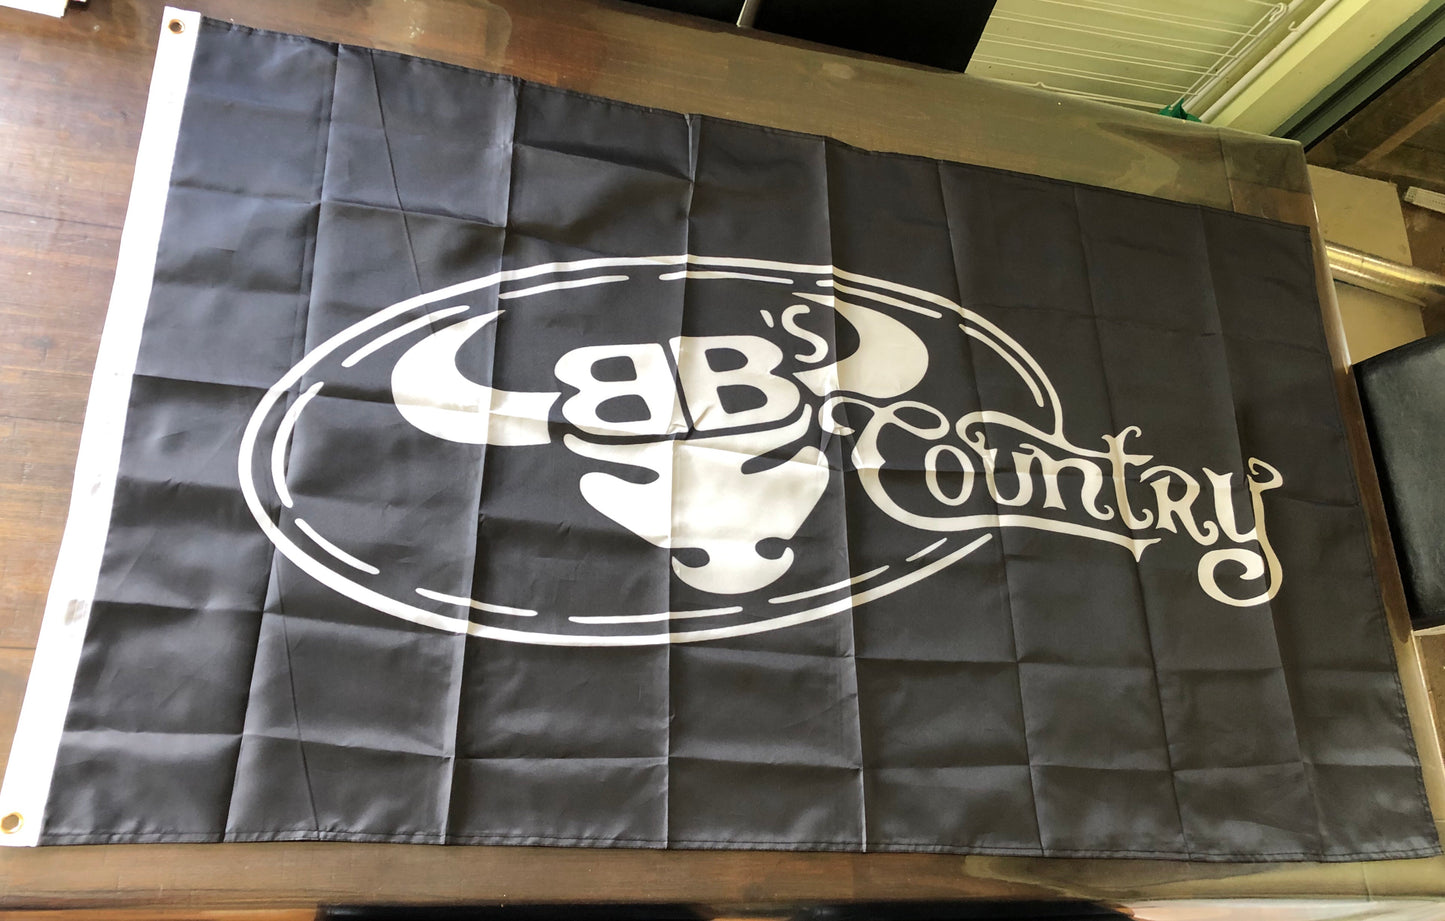 BB’s Country Flag.